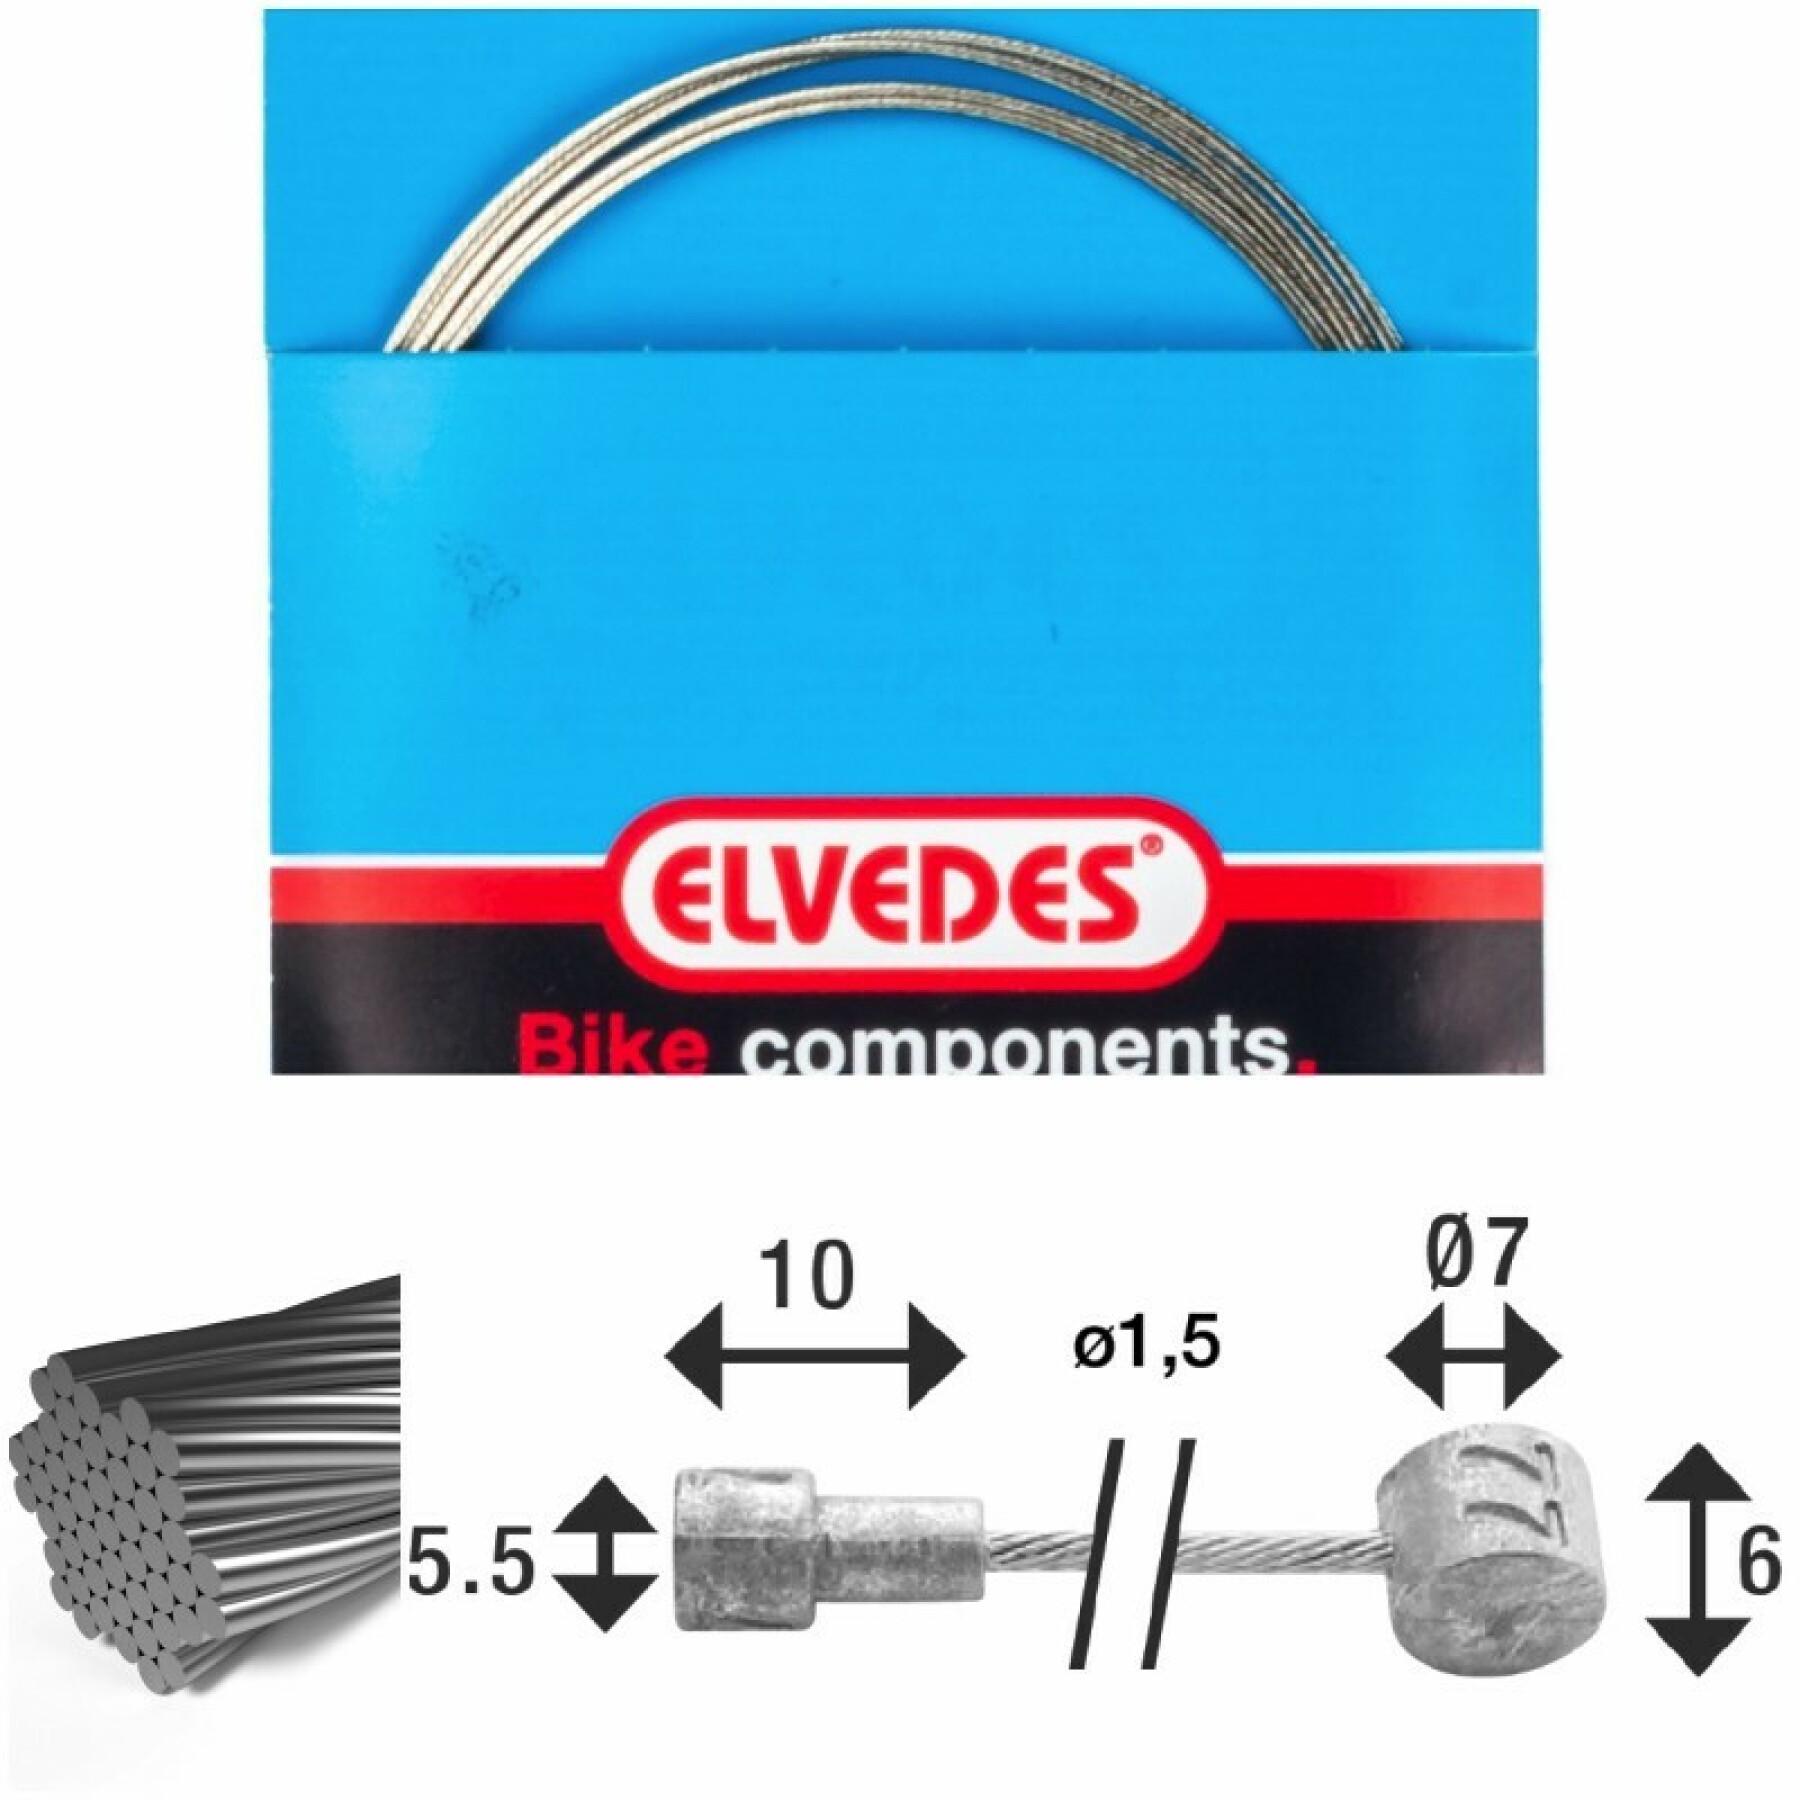 Brake cable 7x7 stainless steel wires ø1,5mm v-head ø5,5x10 and t-nipple Elvedes